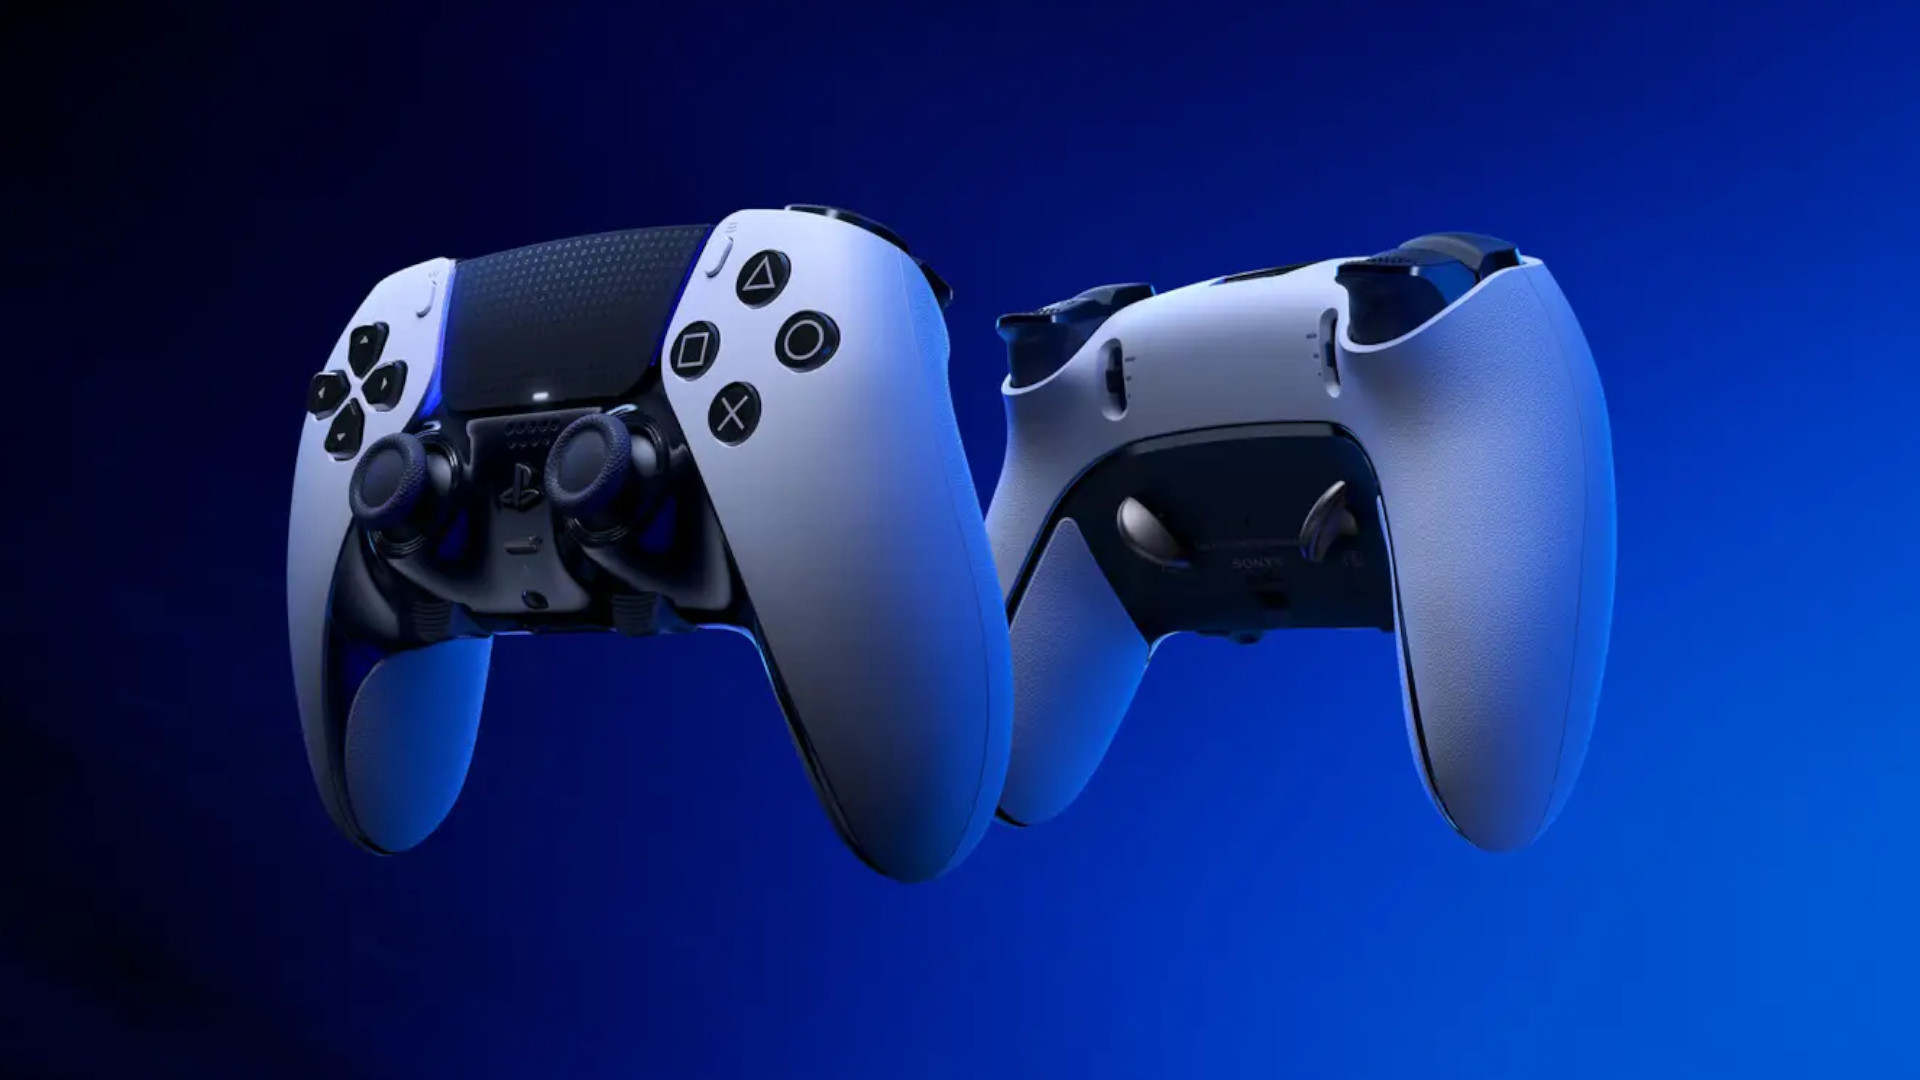 You can now update the DualSense controller without a PS5 – here's how